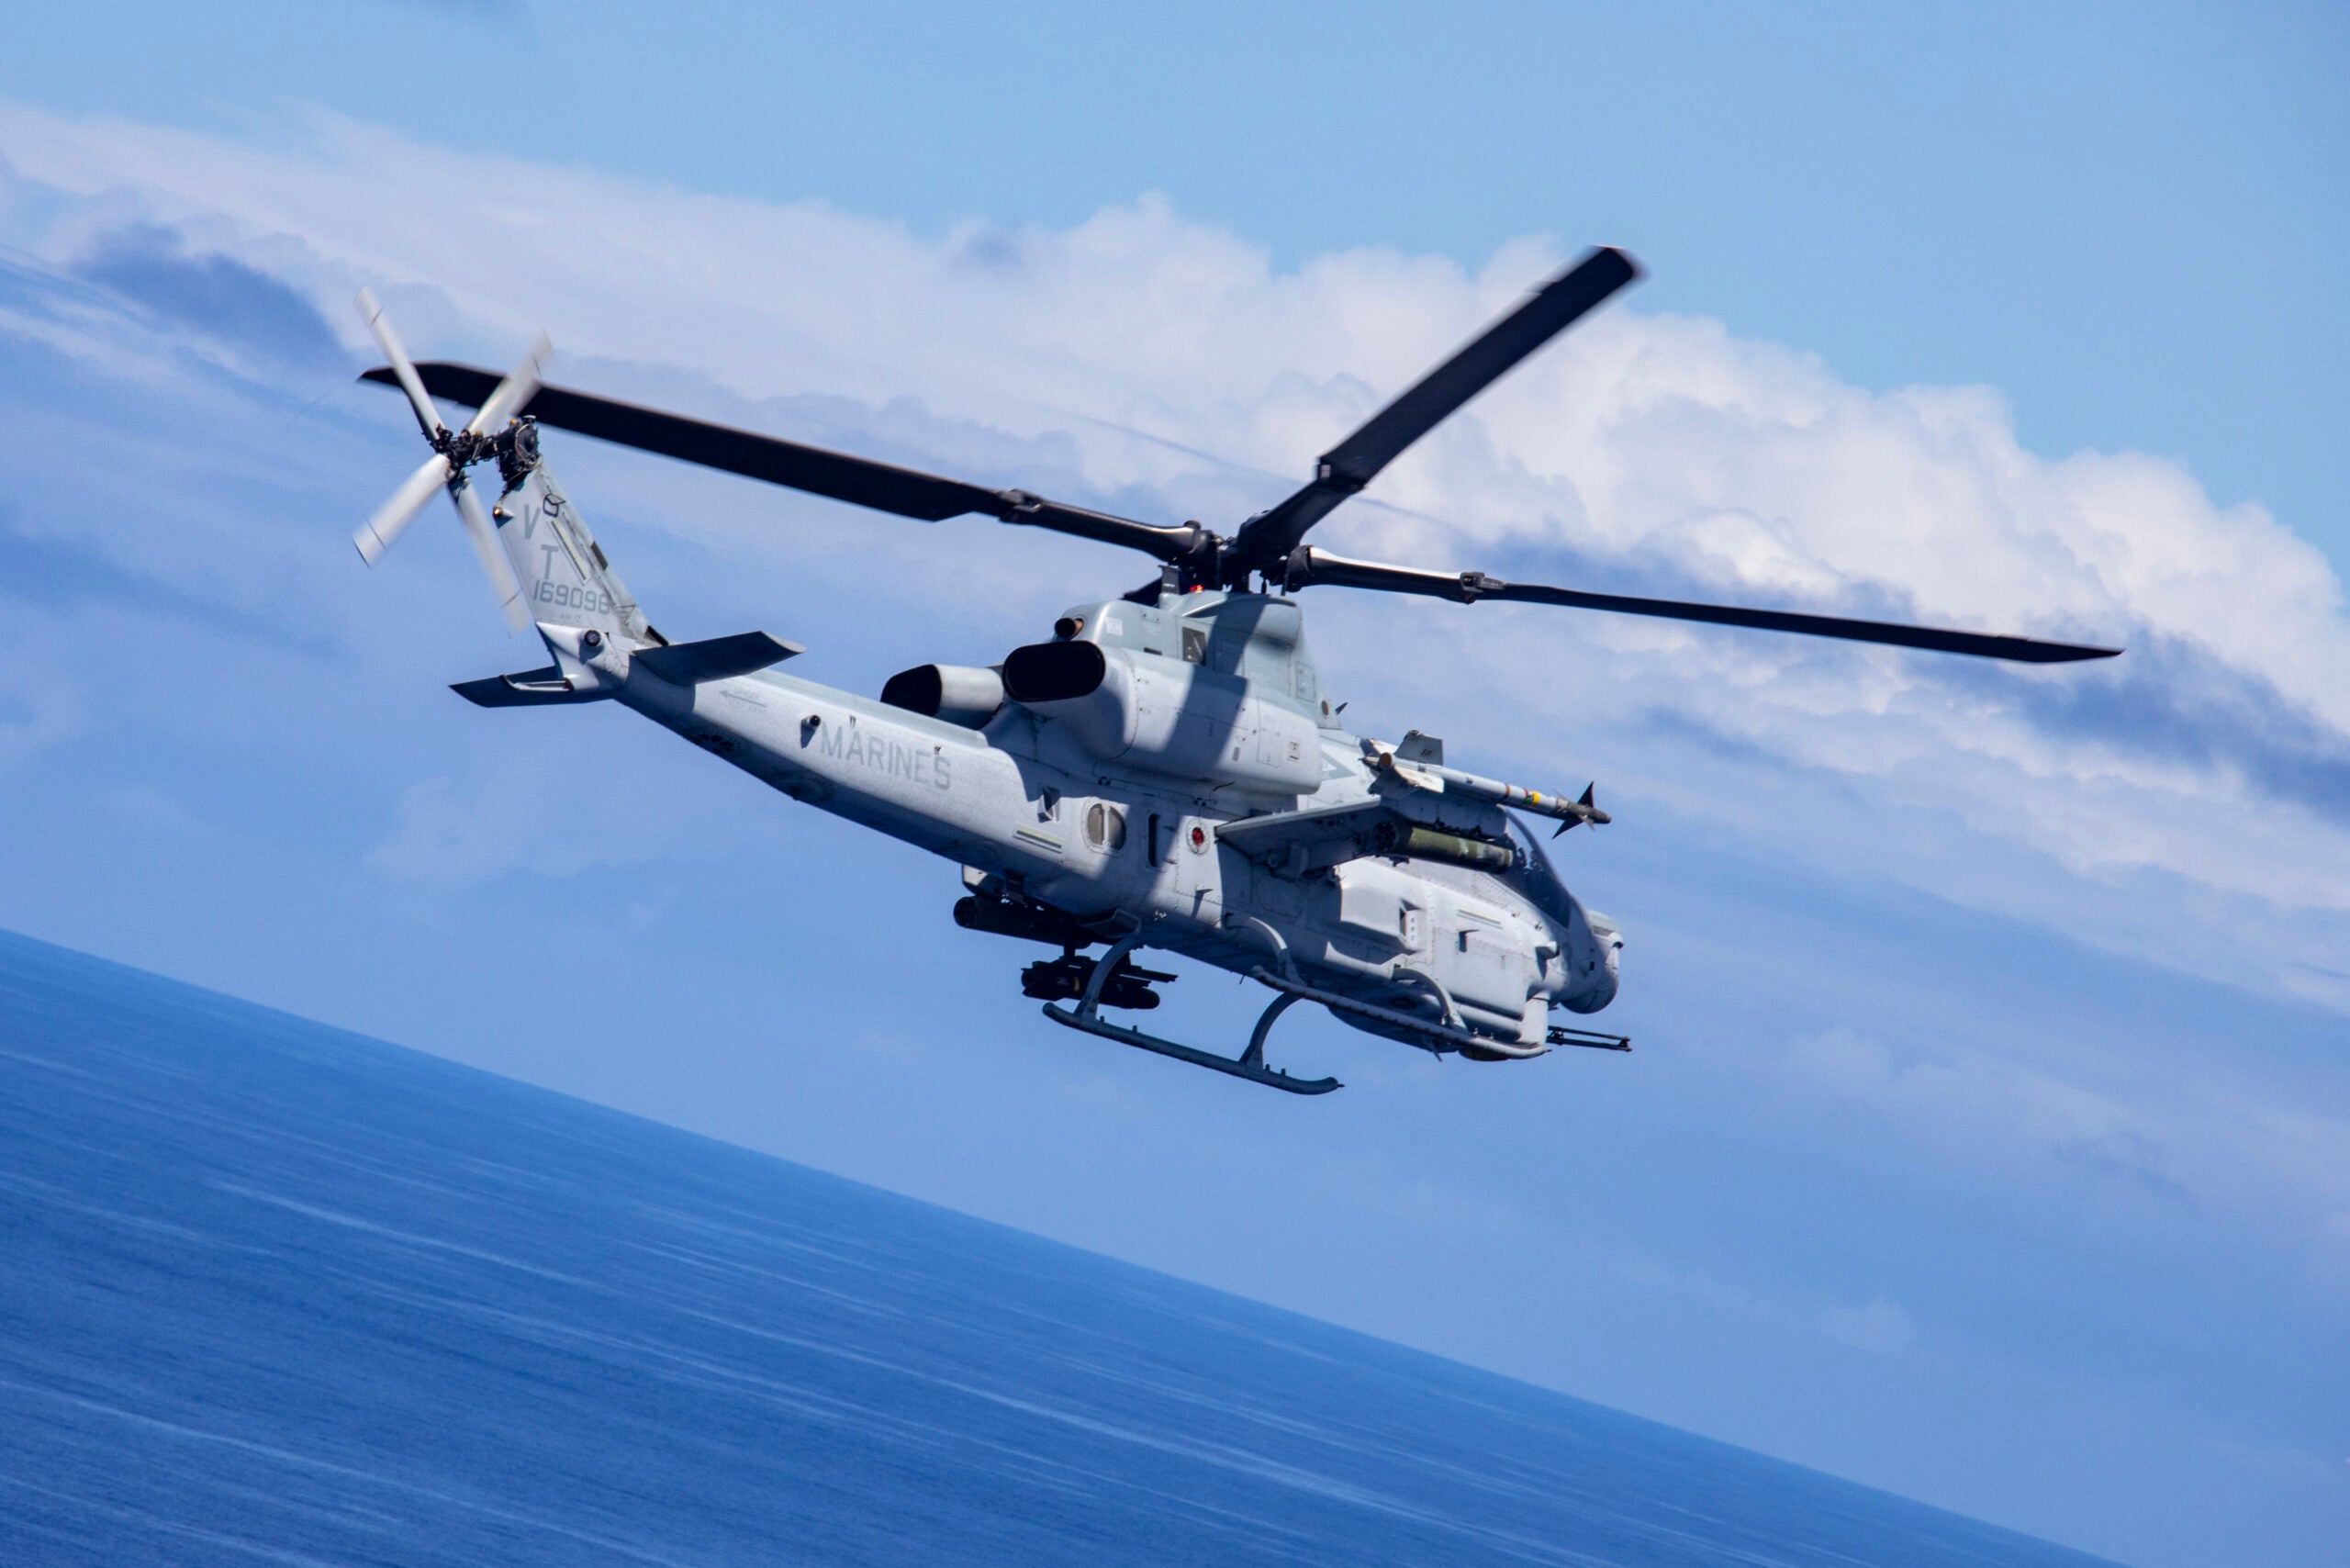 An AH-1Z Viper helicopter with Marine Light Attack Helicopter Squadron 367 conducts a training flight exercise, Marine Corps Base Hawaii, April 21, 2021. Marines with HMLA 367 worked in concert with Marine Medium Tiltrotor Squadron 268 and U.S. Navy Sailors with Helicopter Maritime Strike Squadron 37 to rehearse sea-denial operational scenarios. (U.S. Marine Corps photo by Sgt. Luke Kuennen)